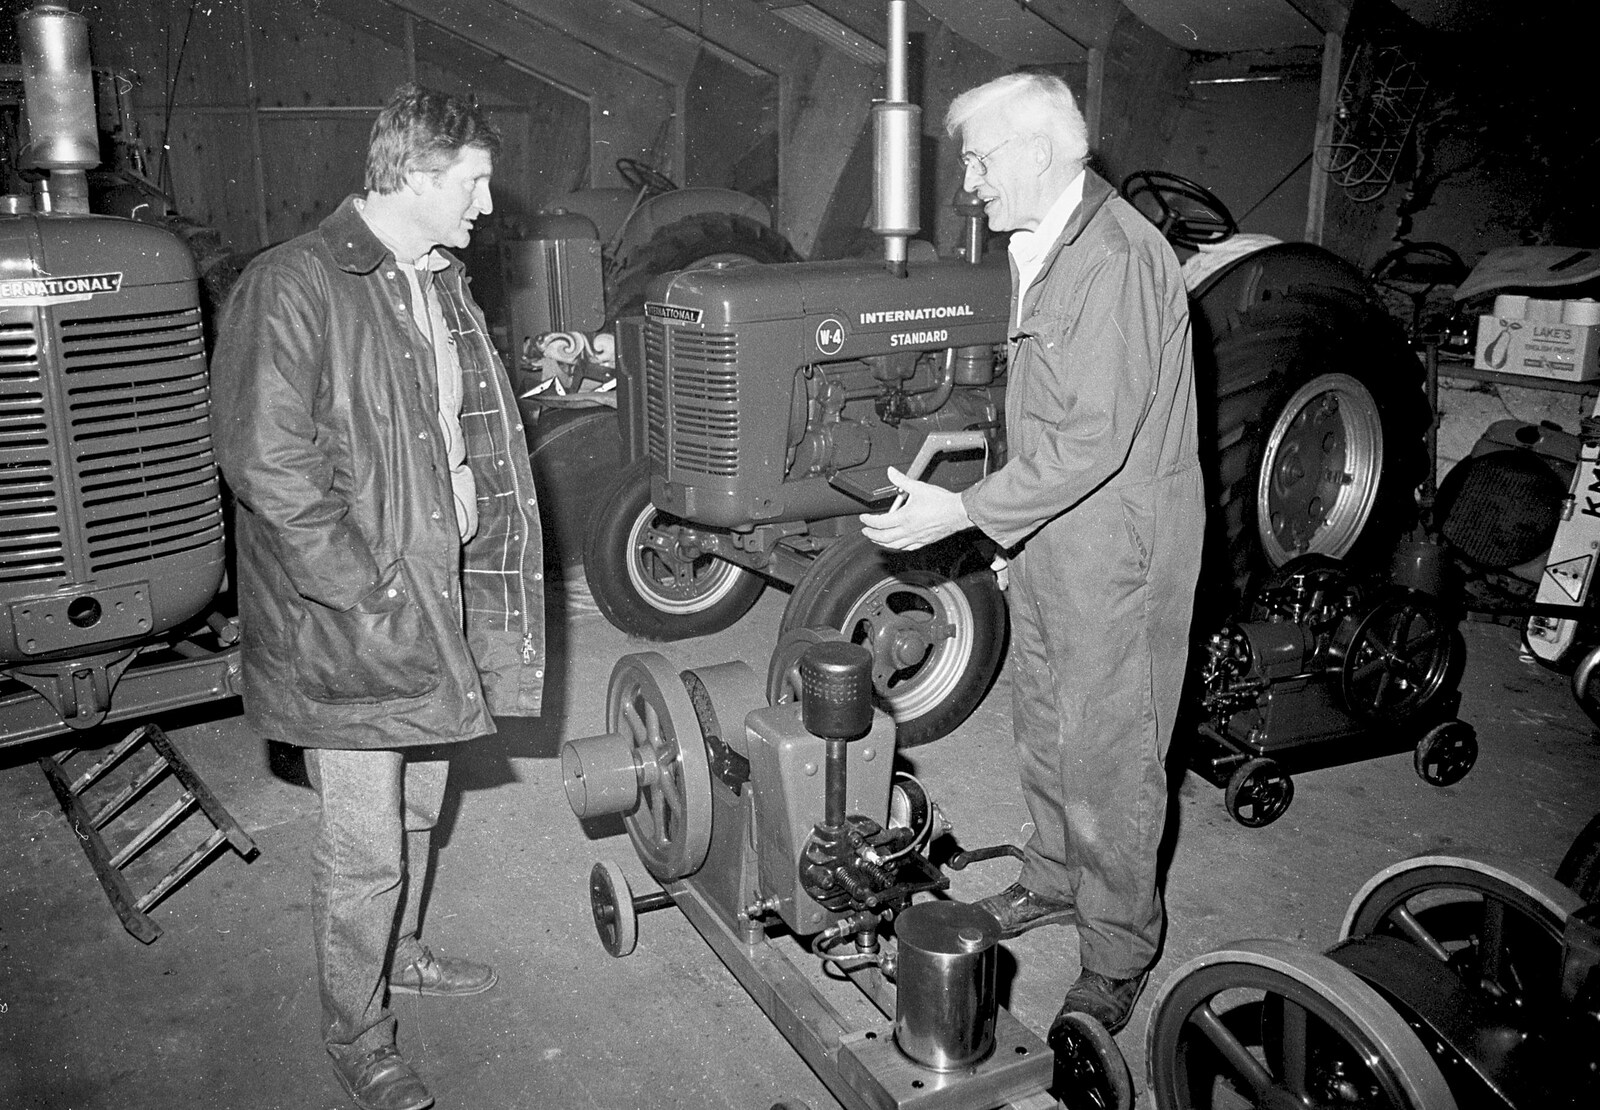 Geoff and his chum talk about machines from A Black and White Life in Concrete, Stuston, Suffolk - 3rd September 1992